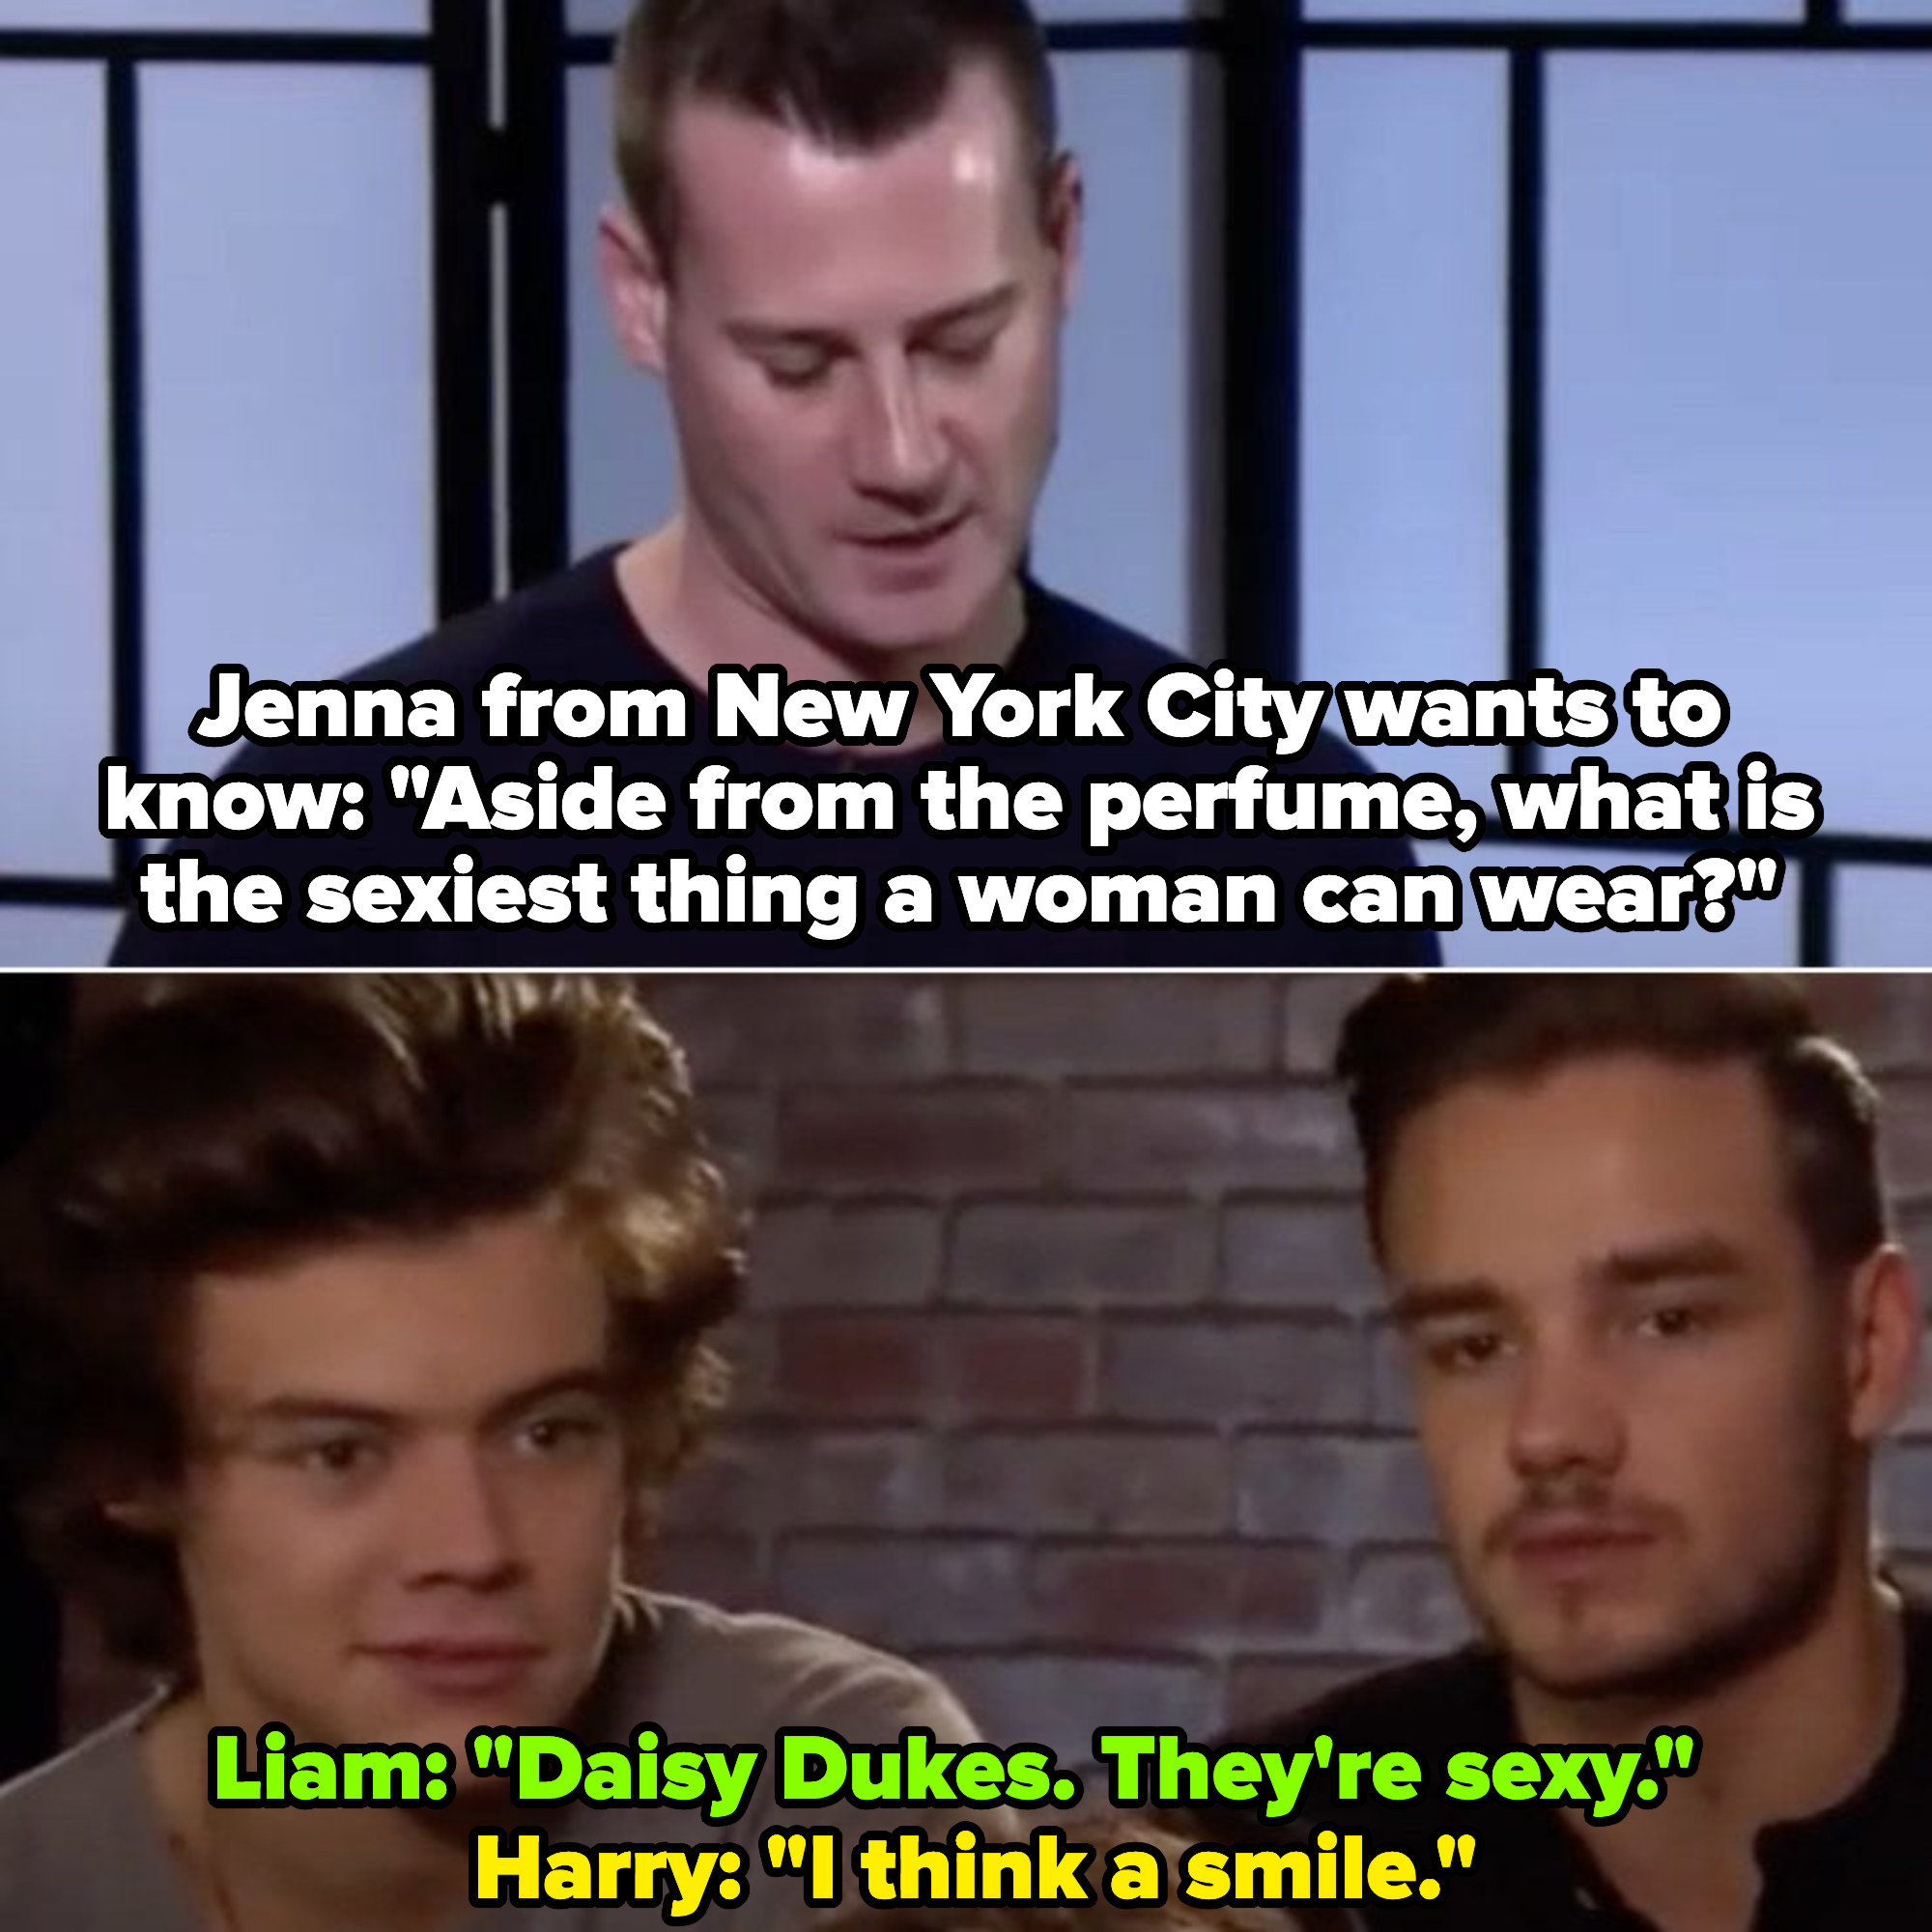 Harry answering a sexist question about the sexiest thing a woman can wear -- his answer being: &quot;I think a smile&quot;